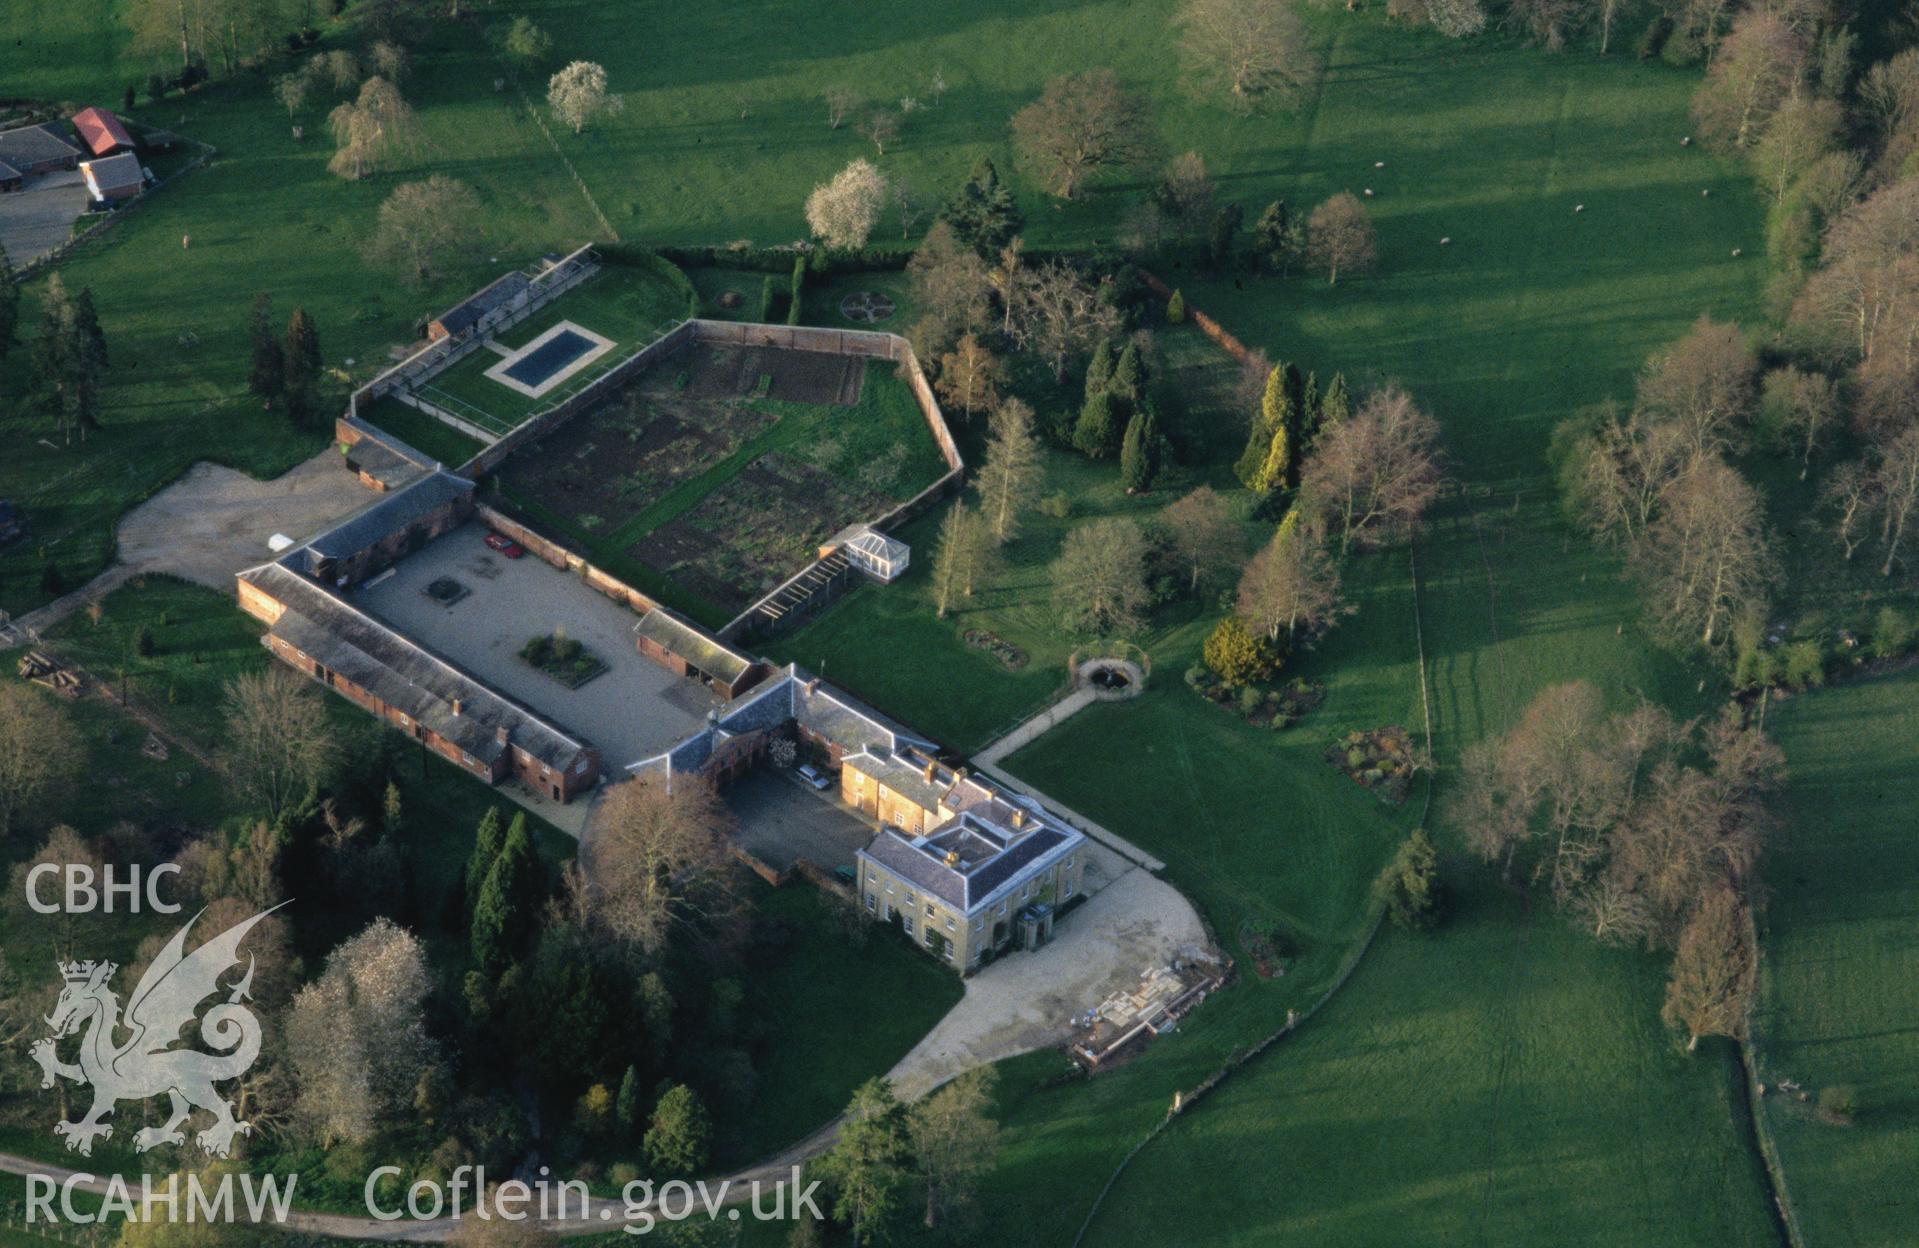 Slide of RCAHMW colour oblique aerial photograph of Glansevern Hall, taken by C.R. Musson, 12/4/1993.